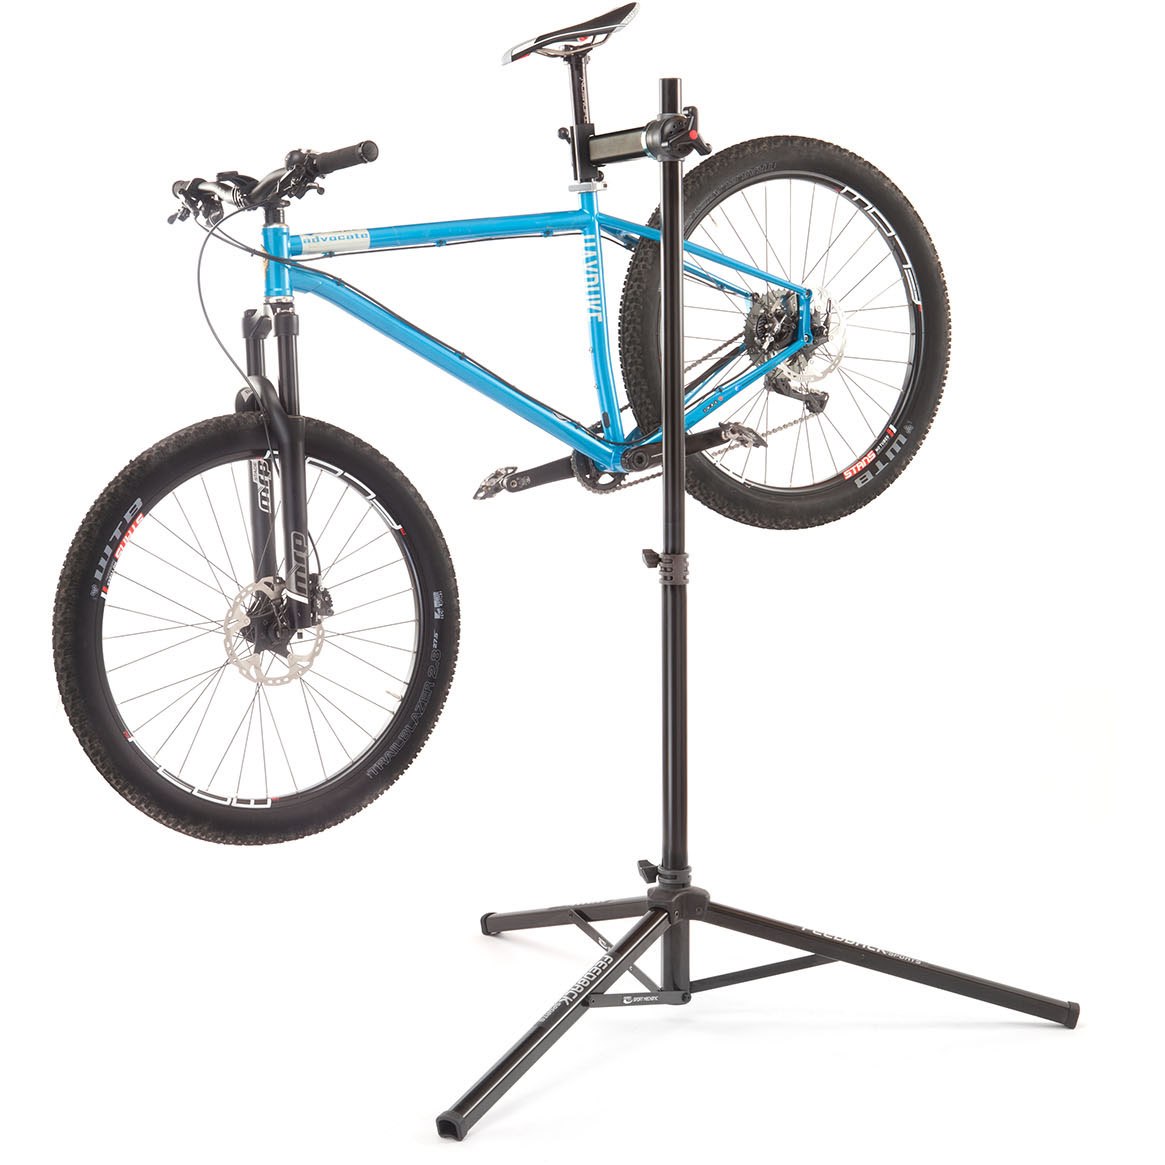 Secure your mountain bike on a bike stand like this for any kind of maintenance including replacing the chain.